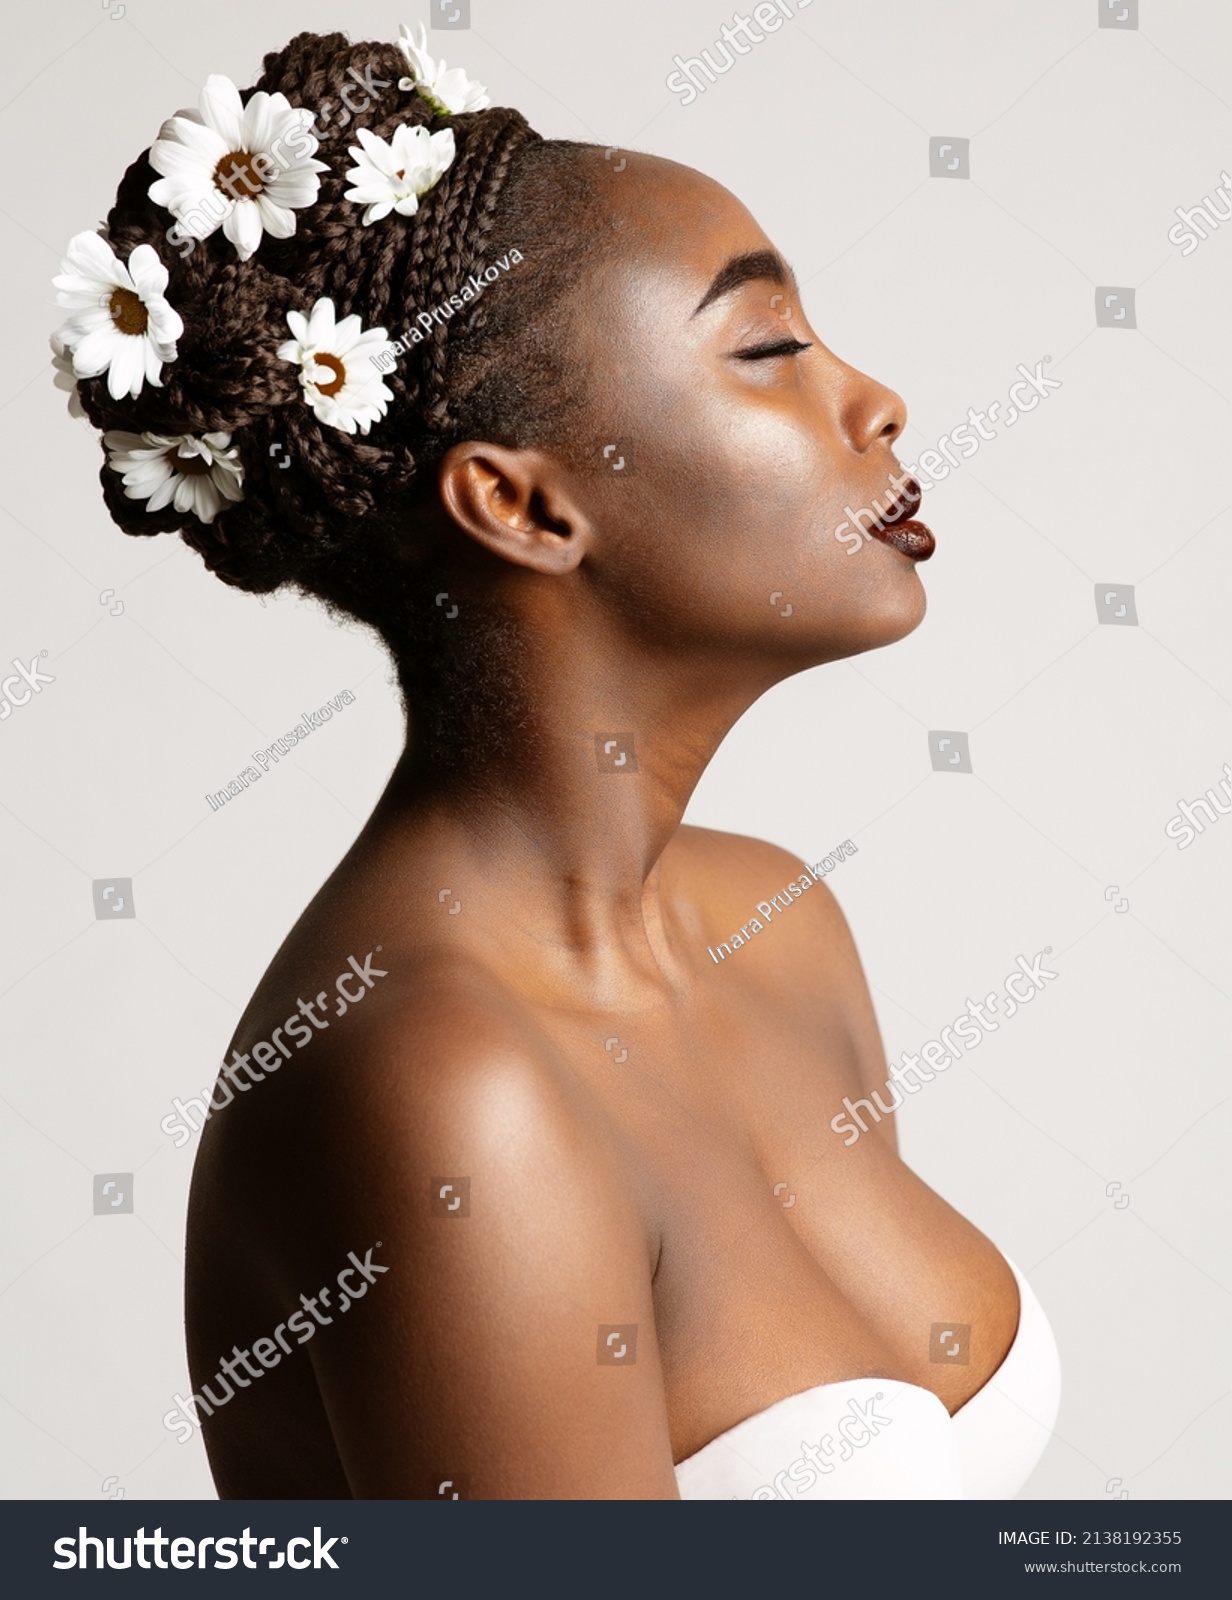 Beauty Profile of African American Woman with White Chamomile Flowers in Black Hair Braids. Fashion Portrait of Dark Skin Model over White. Wedding Make up and Bride Cornrows Hairstyle #2138192355